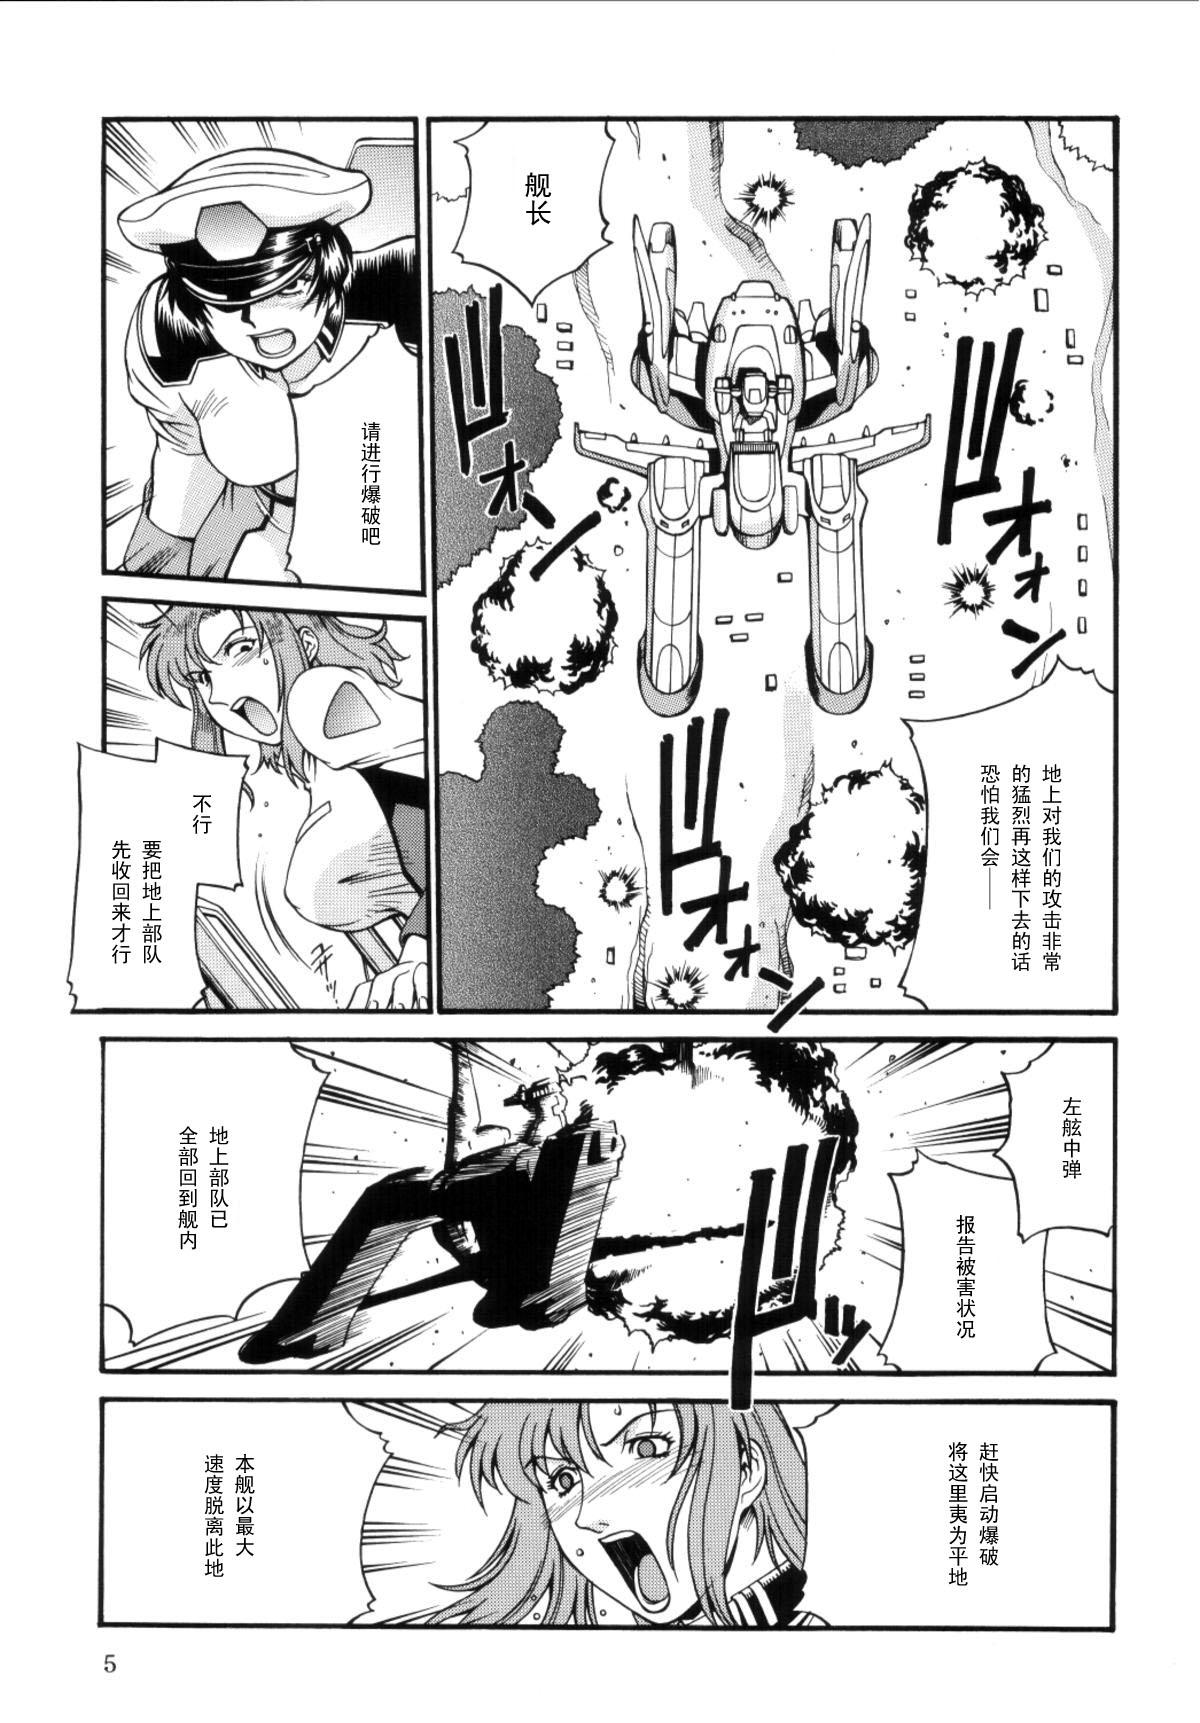 Woman Fucking SEED OUT - Gundam seed Les - Page 5